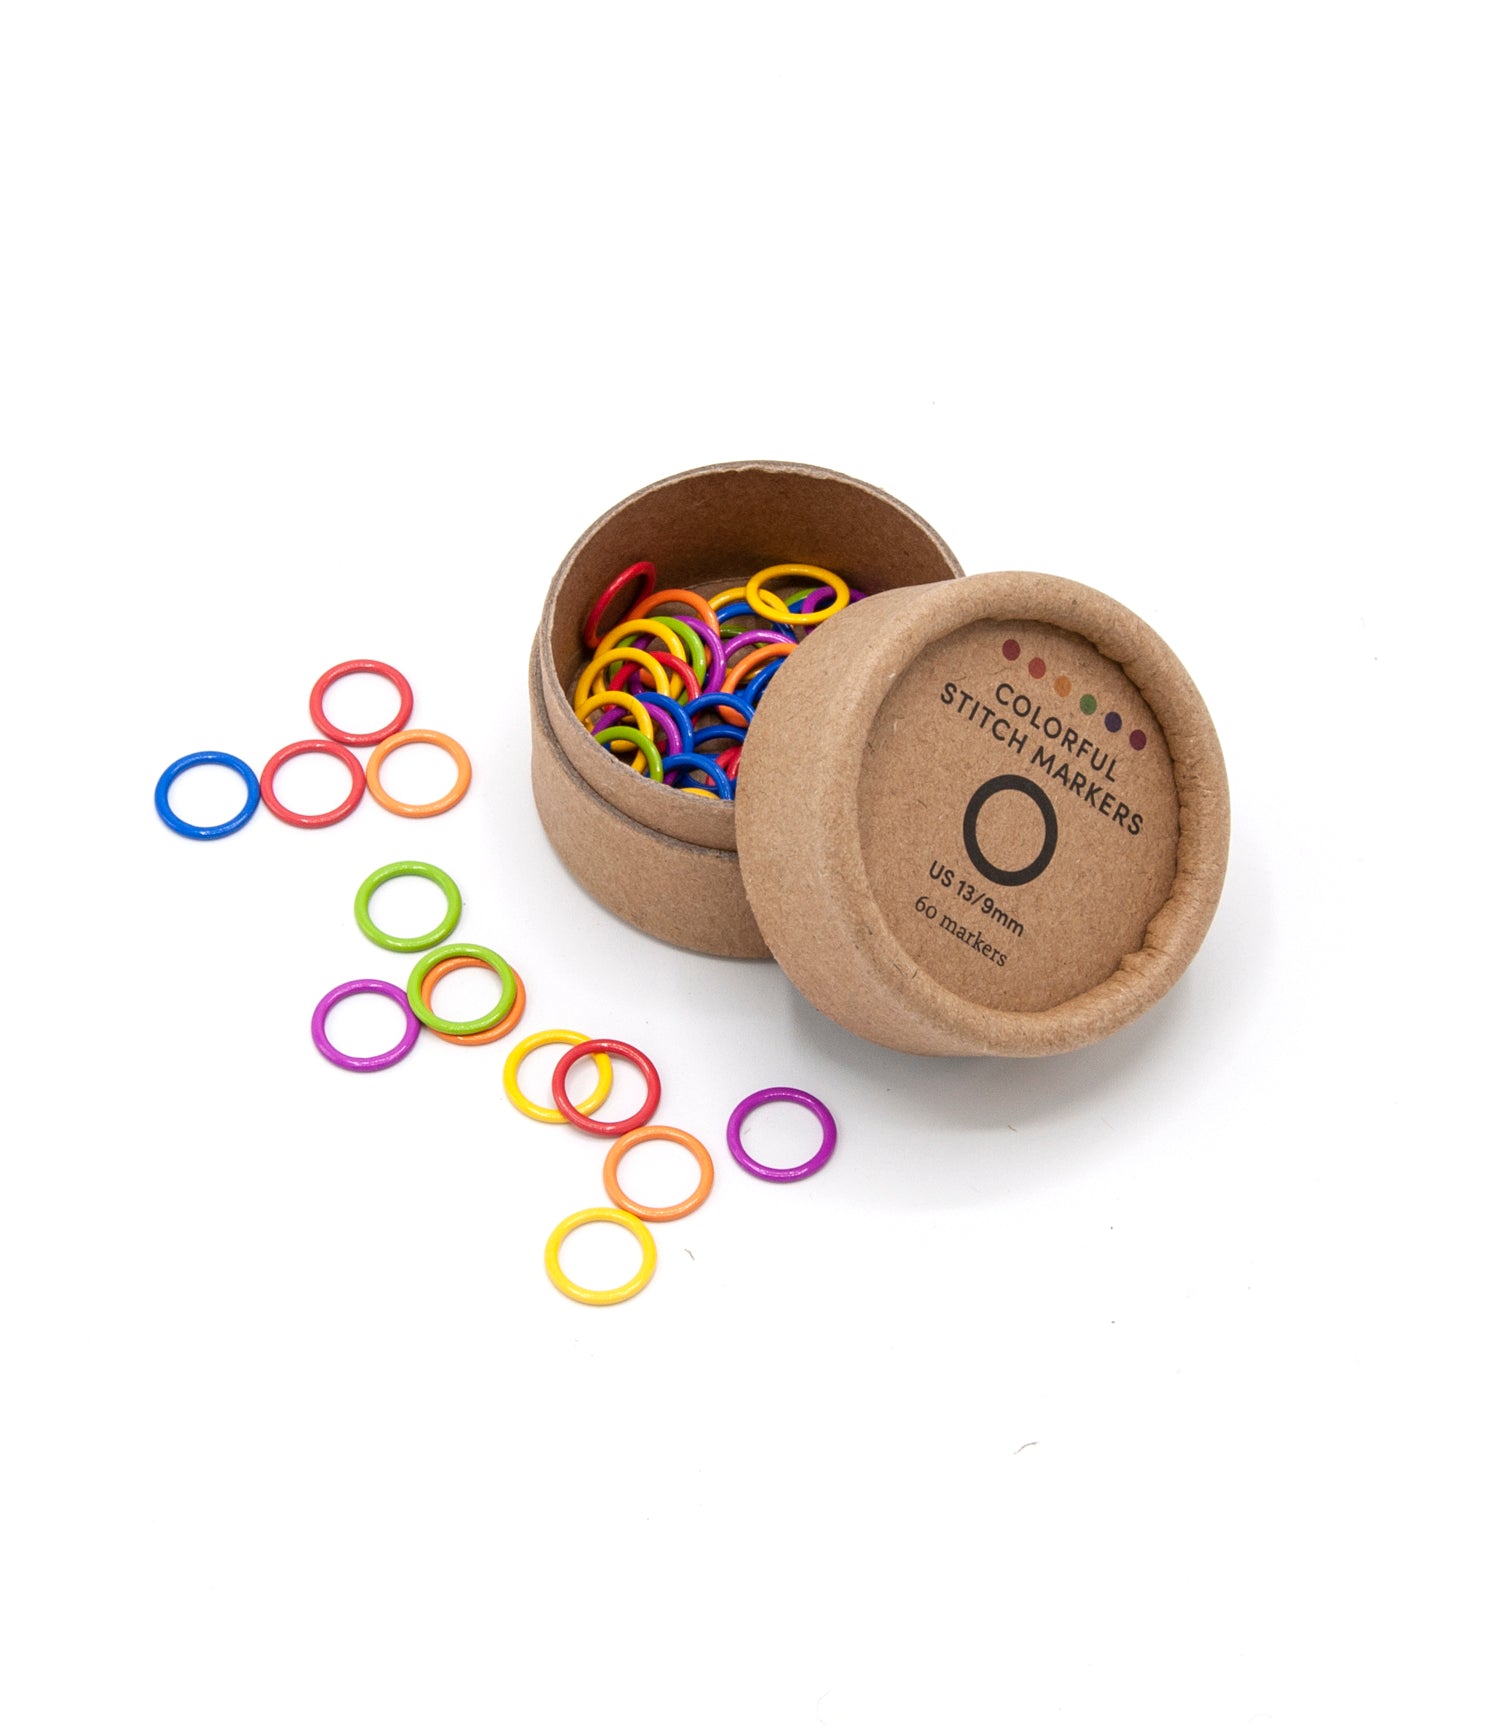 Cocoknits Colorful Ring Stitch Markers